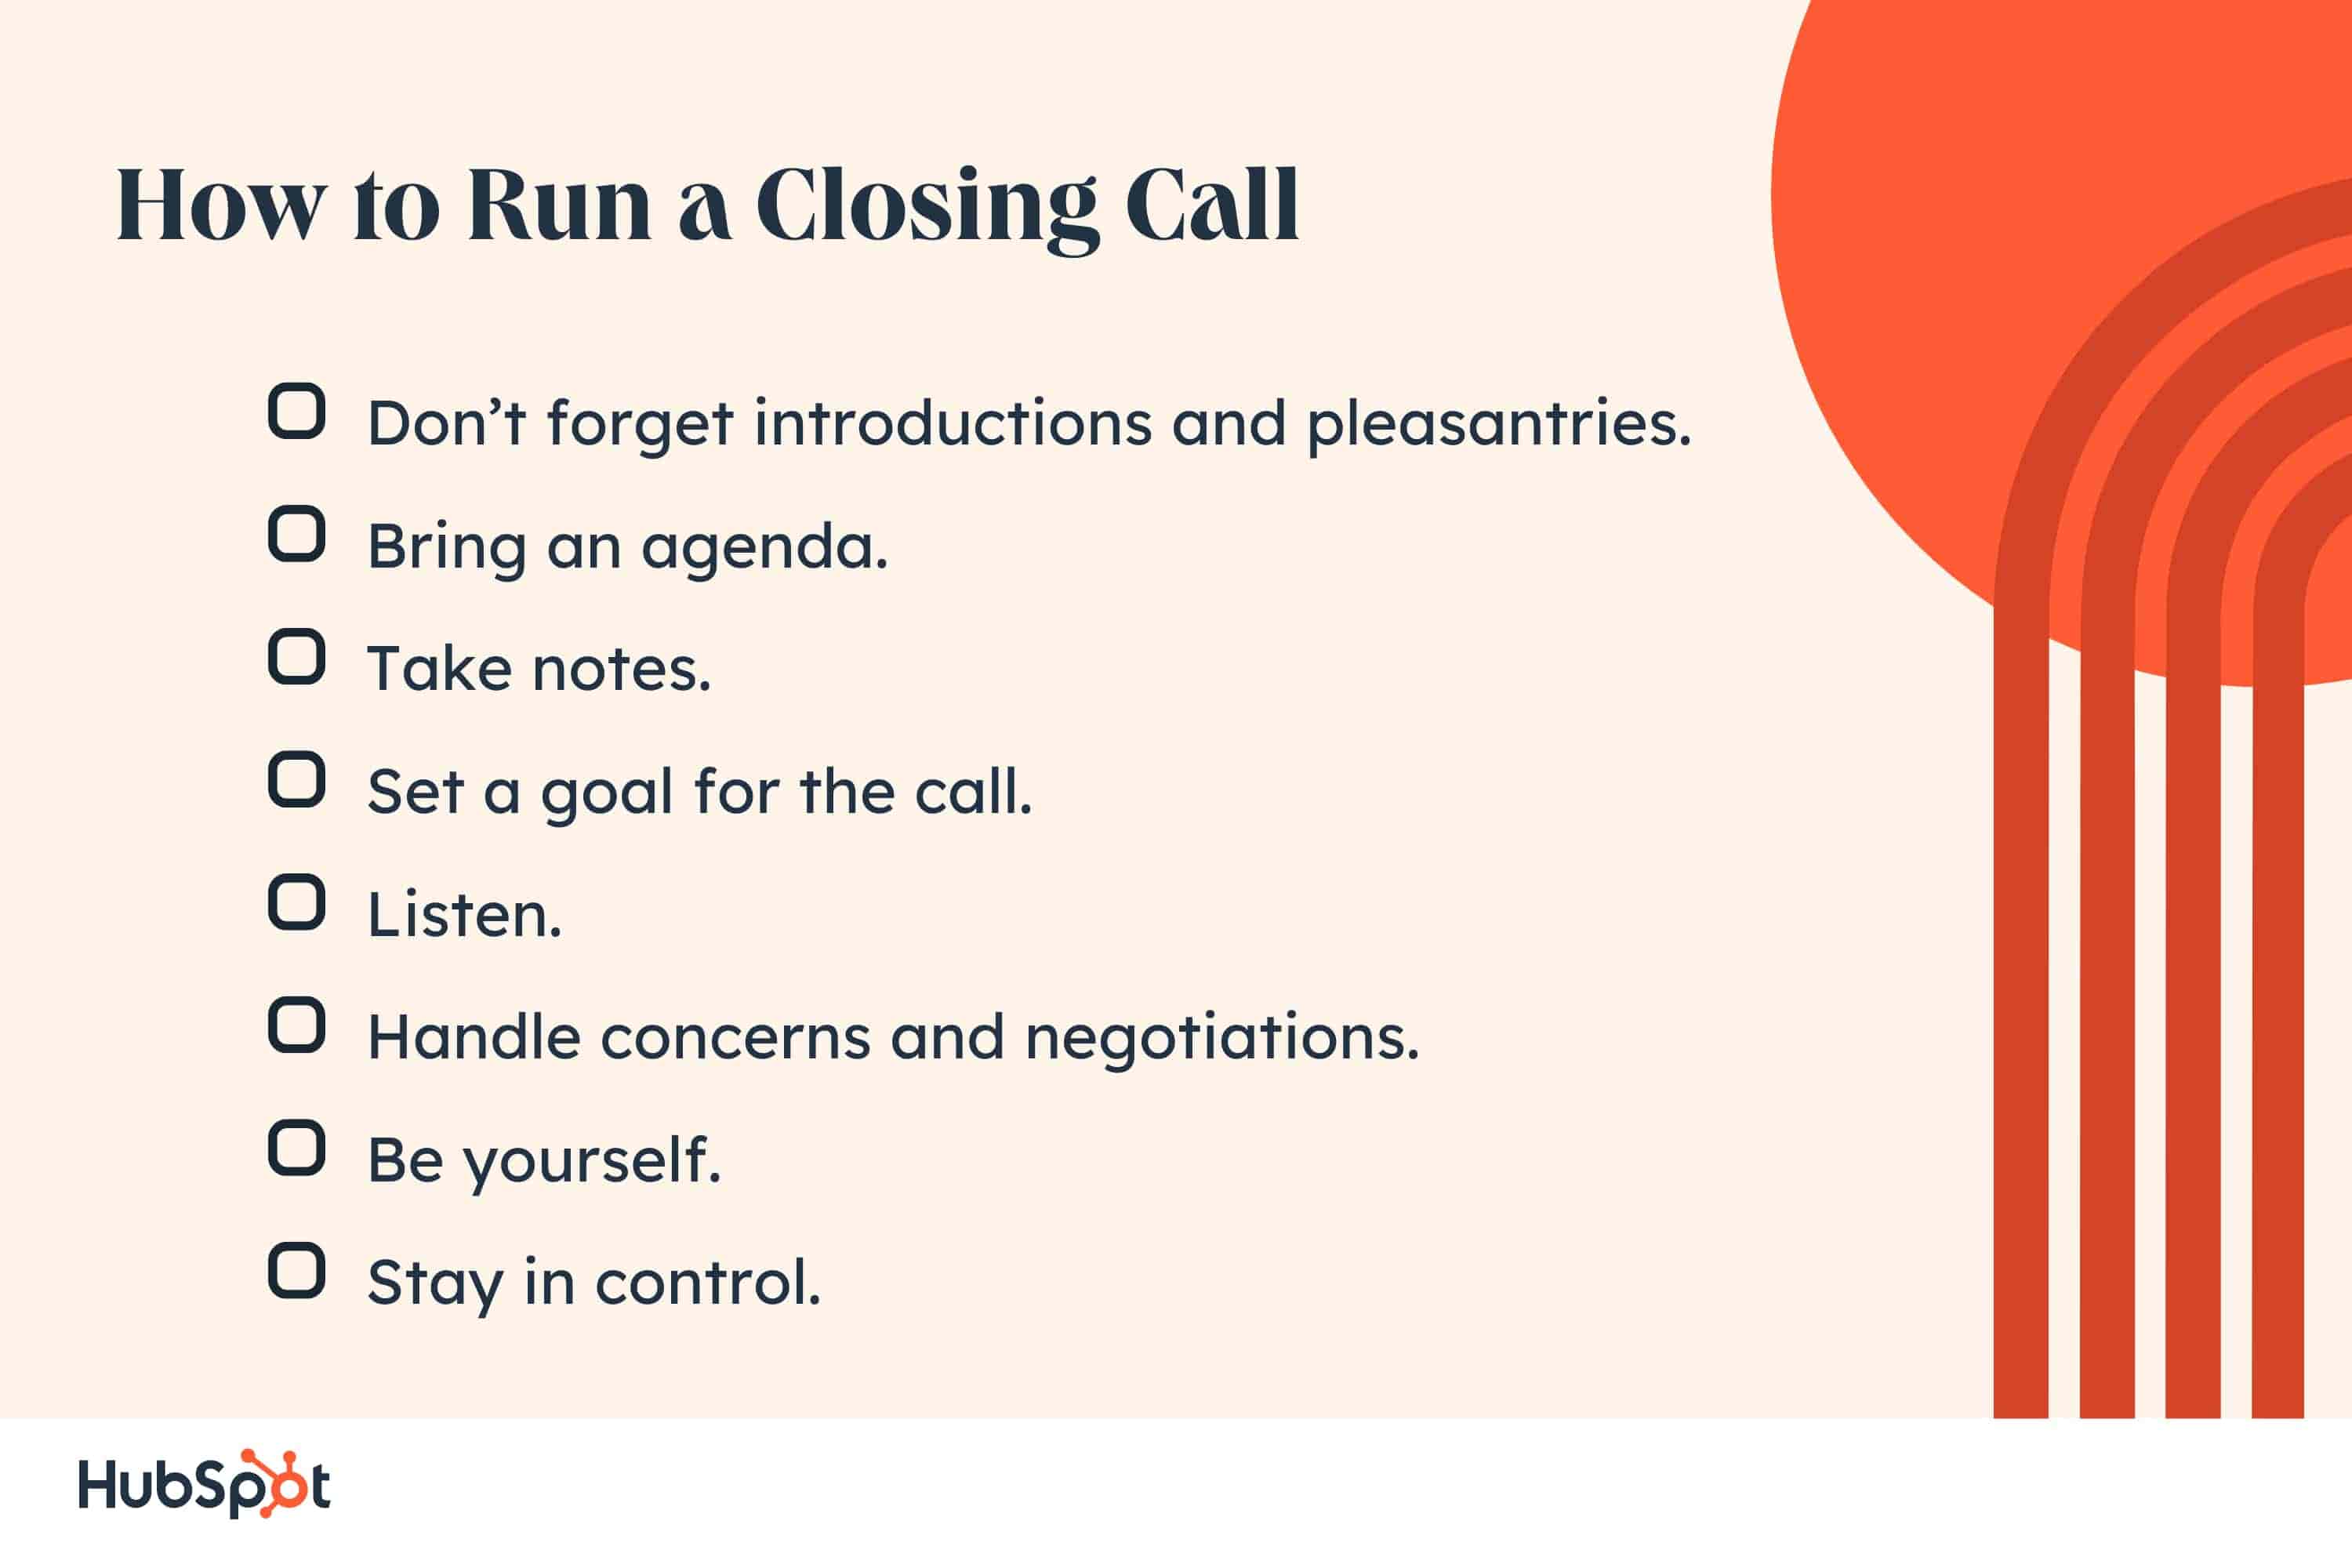 How to Run a Closing Call. Don’t forget introductions and pleasantries. Bring an agenda. Take notes. Set a goal for the call. Listen. Handle concerns and negotiations. Be yourself. Stay in control.